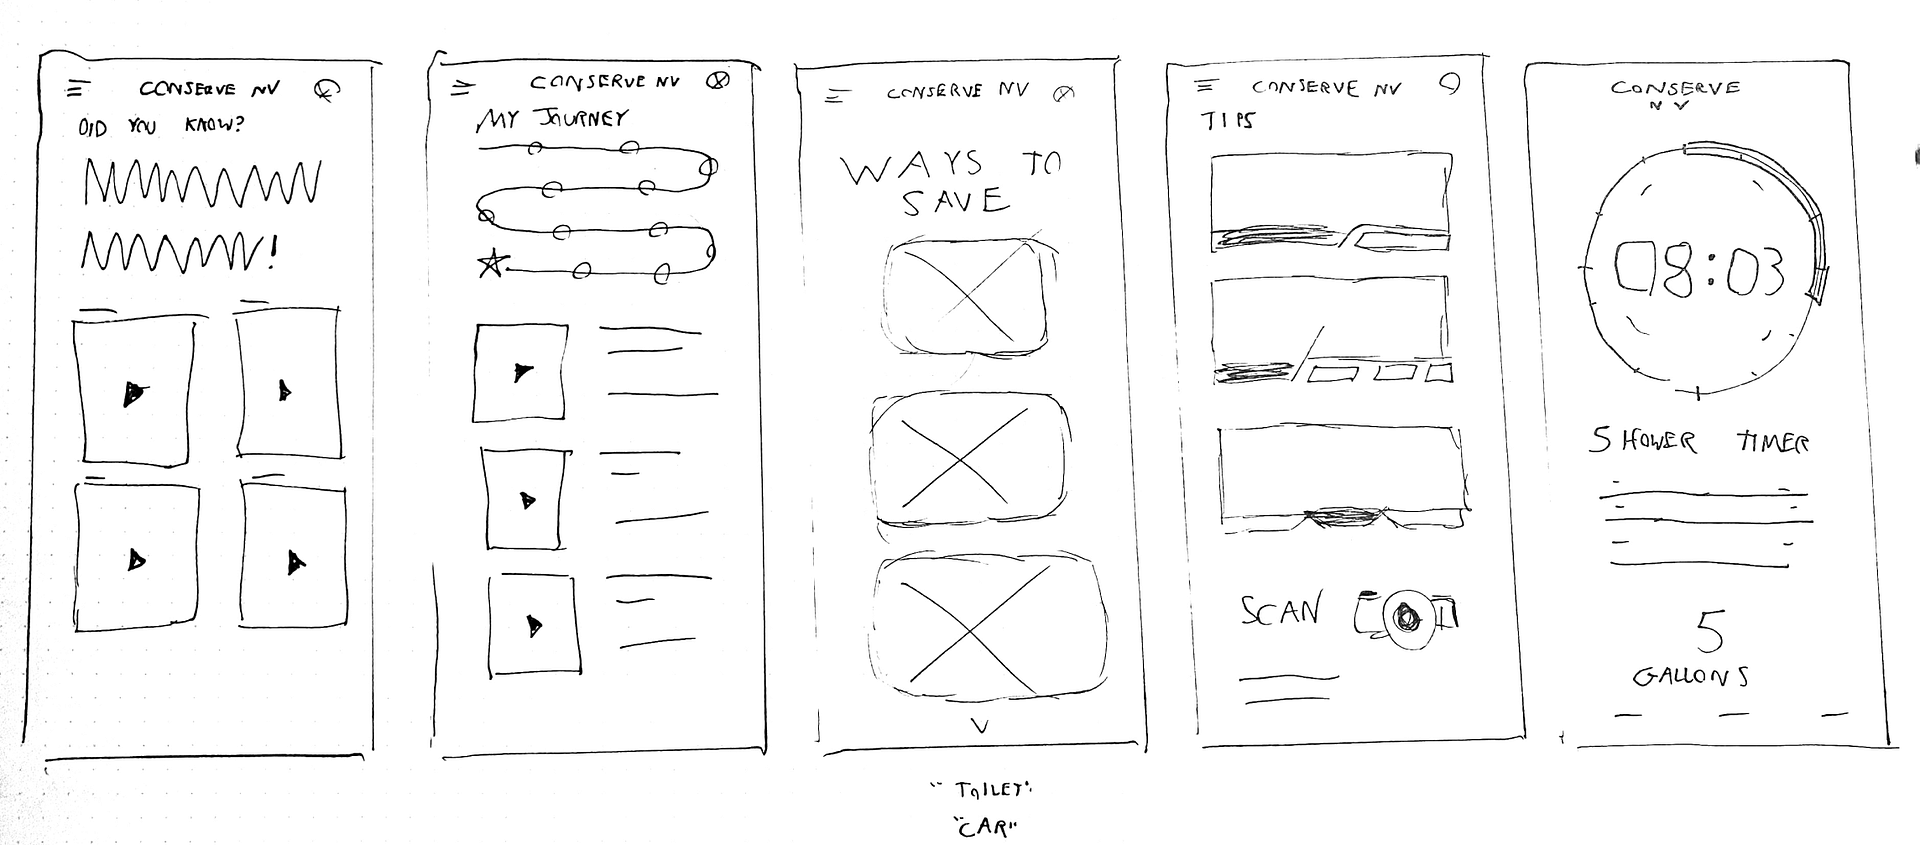 Conserve_Wireframes2-3